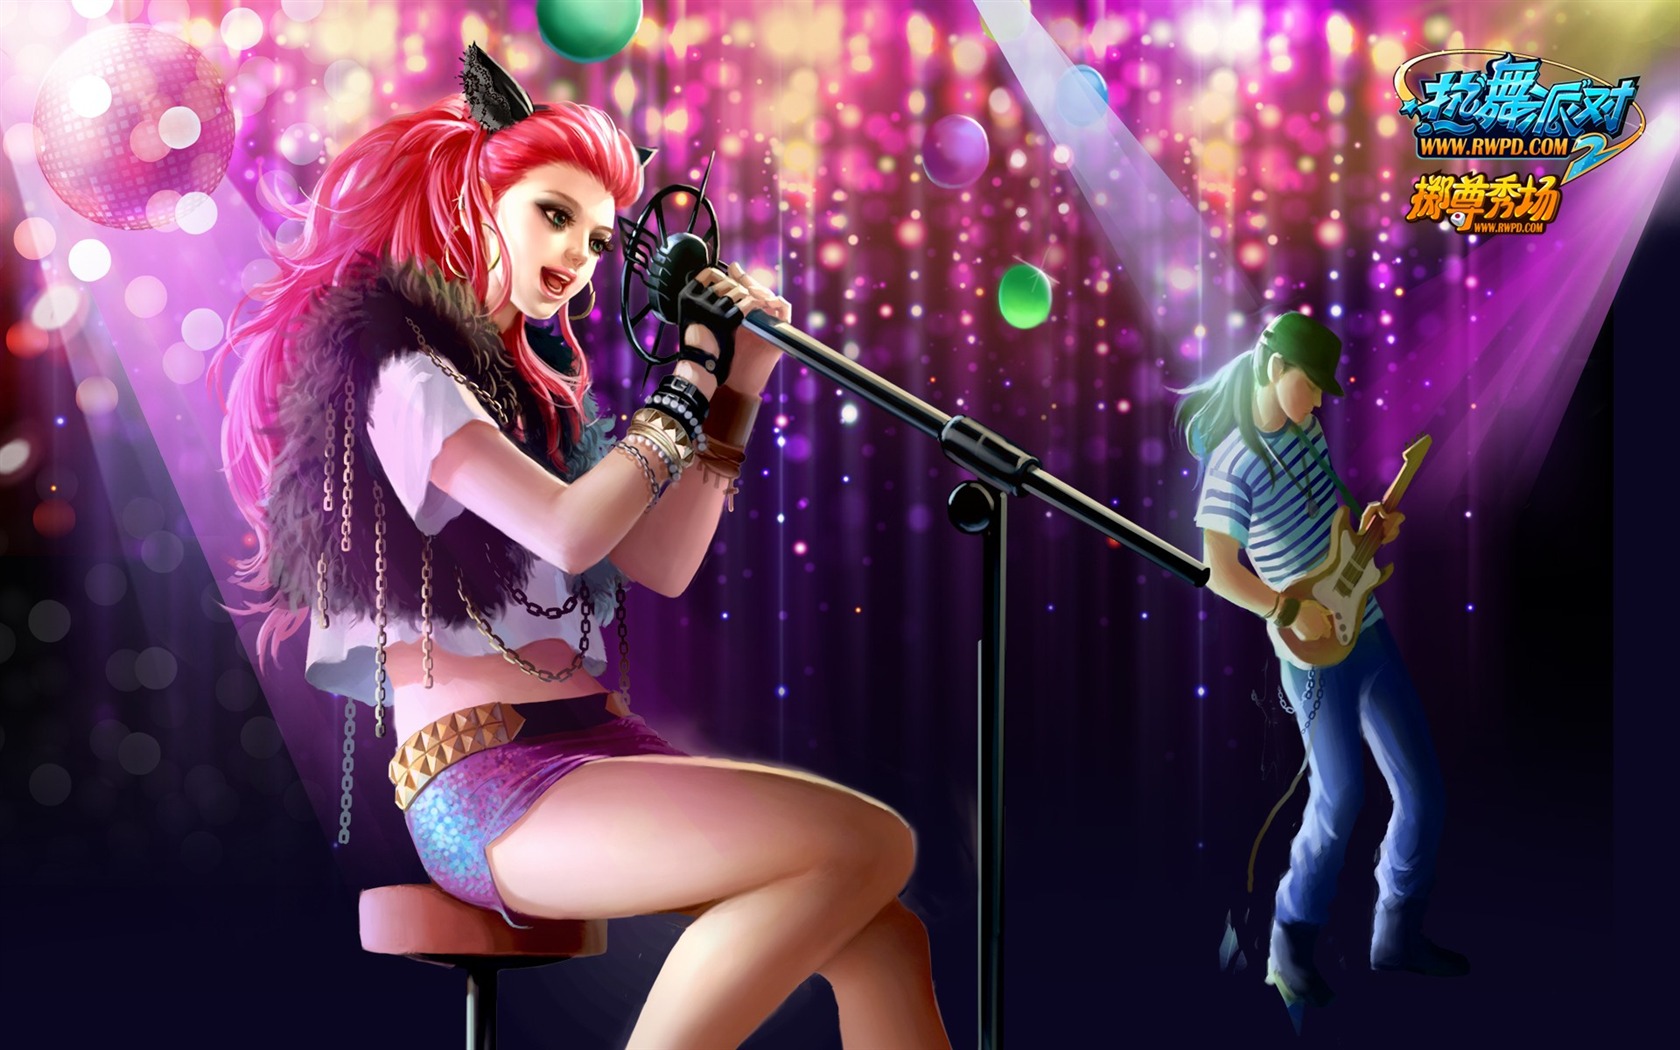 Online game Hot Dance Party II official wallpapers #38 - 1680x1050